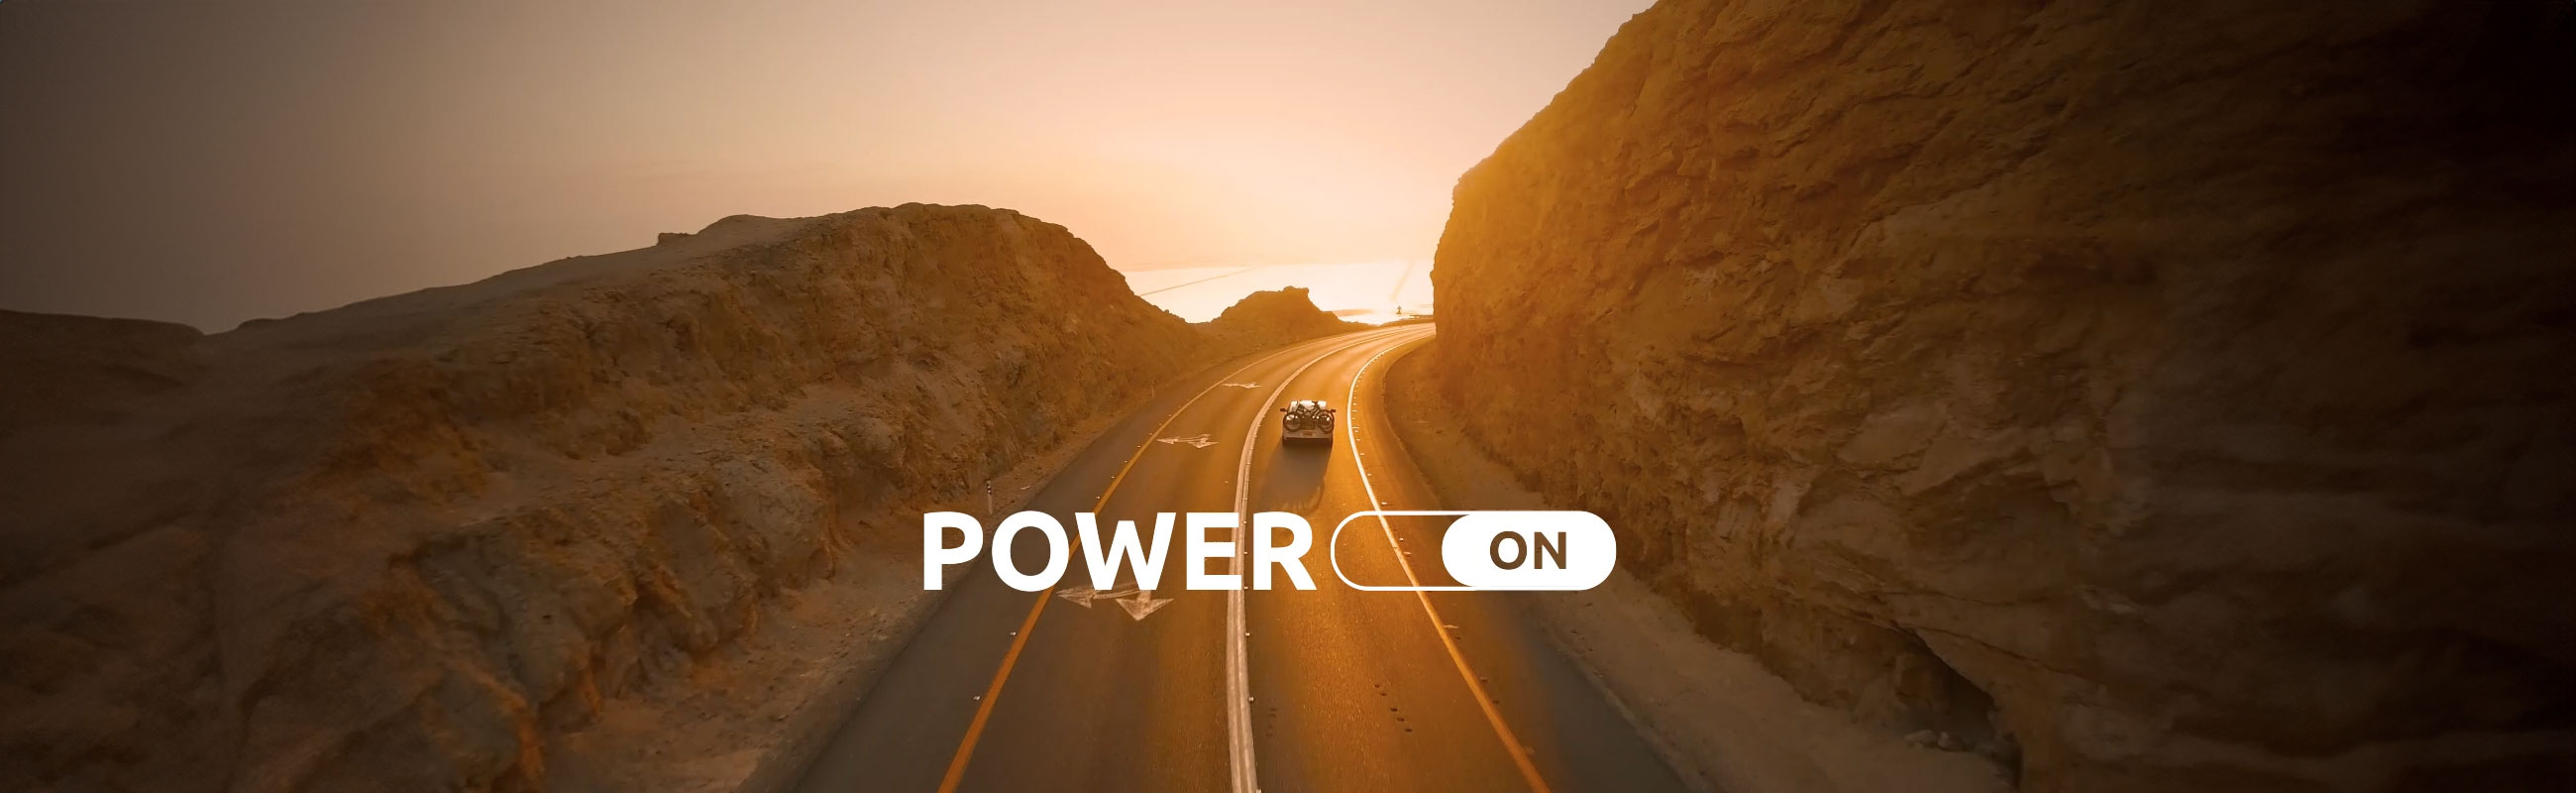 Batteries Plus Sparks Spring Adventures with Seasonal ‘Power On’ Campaign